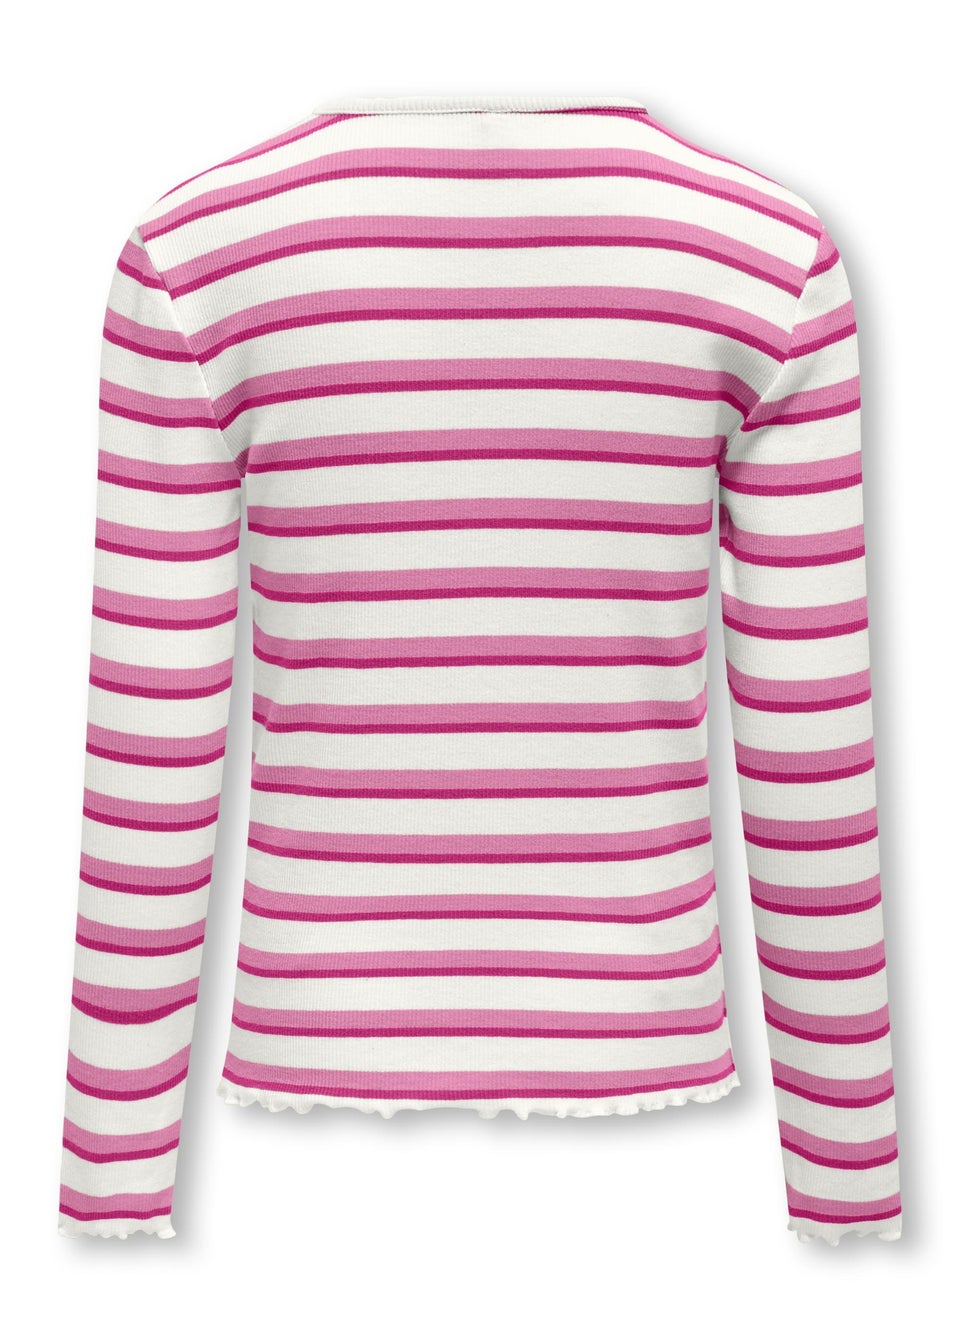 ONLY Girls Pink Stripe Long Sleeve Top (5-14yrs)